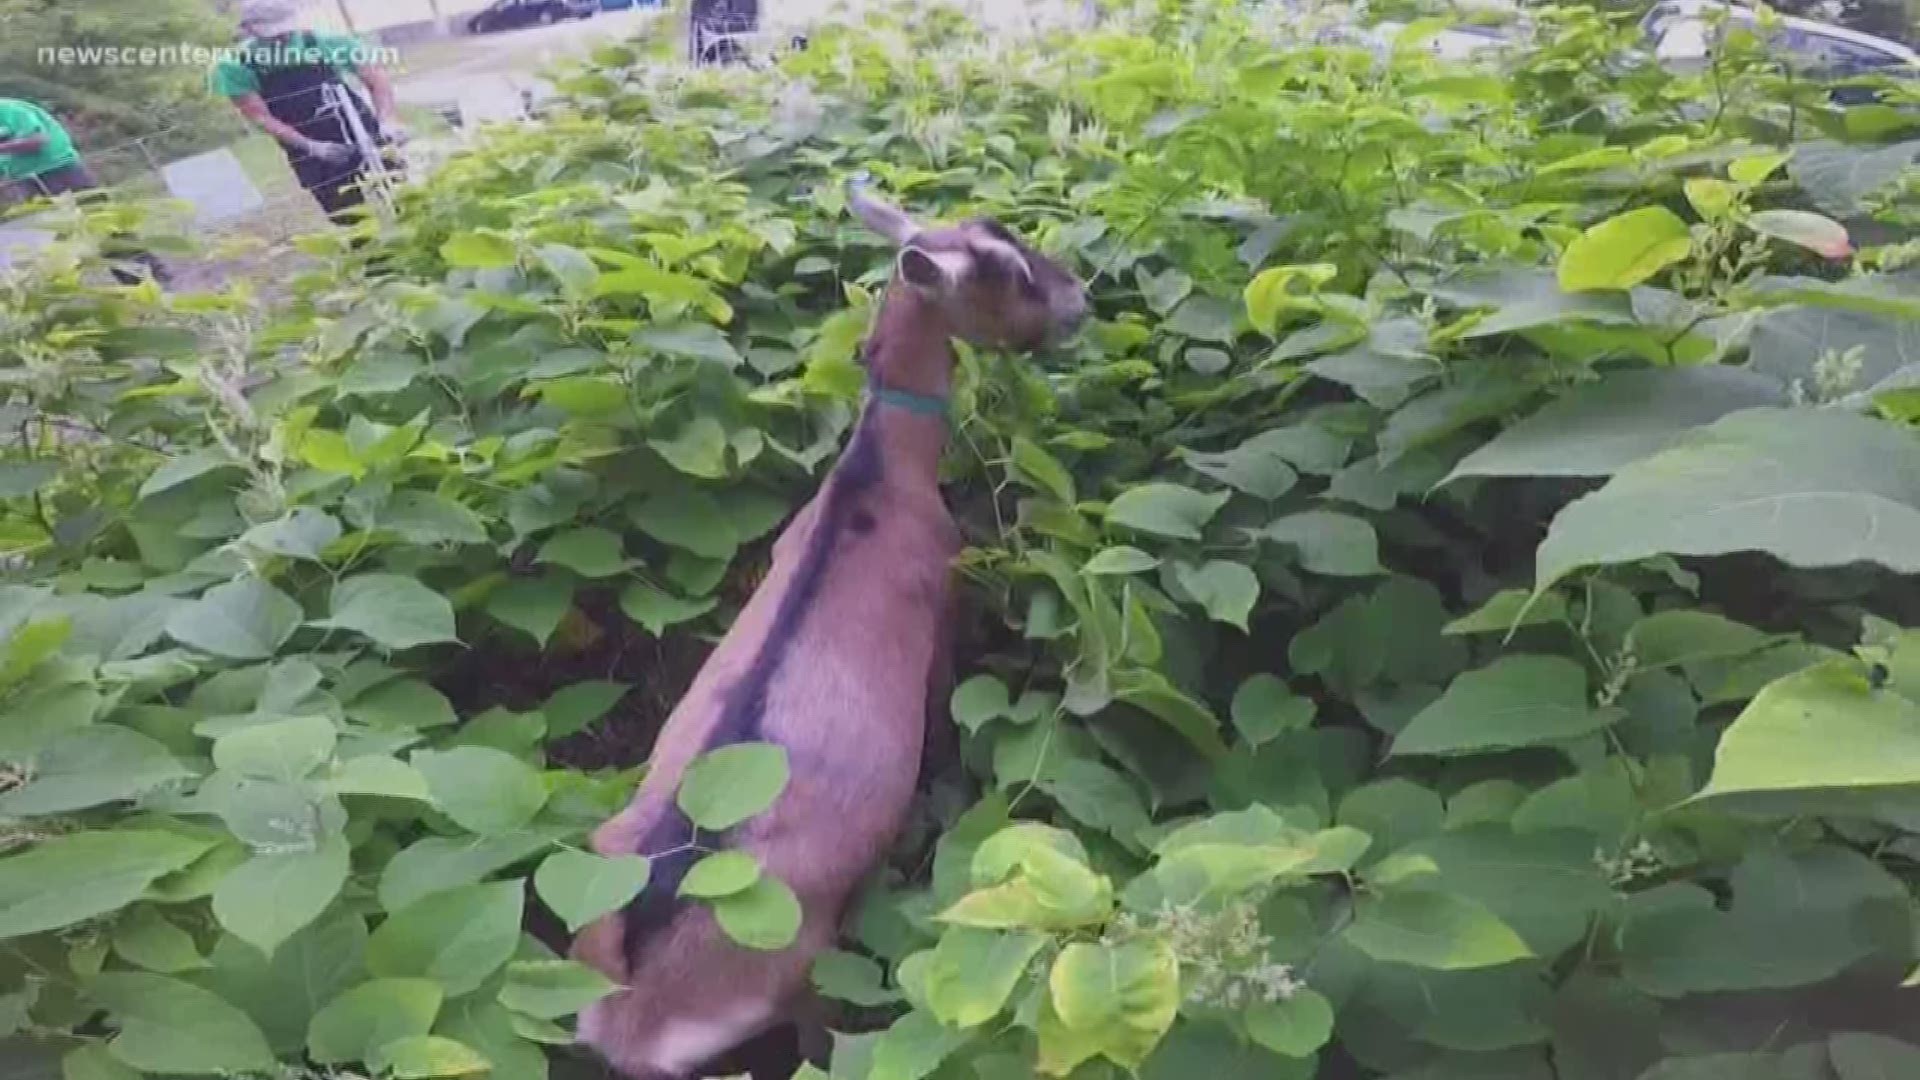 Goats being used in South Portland to rid invasive plants